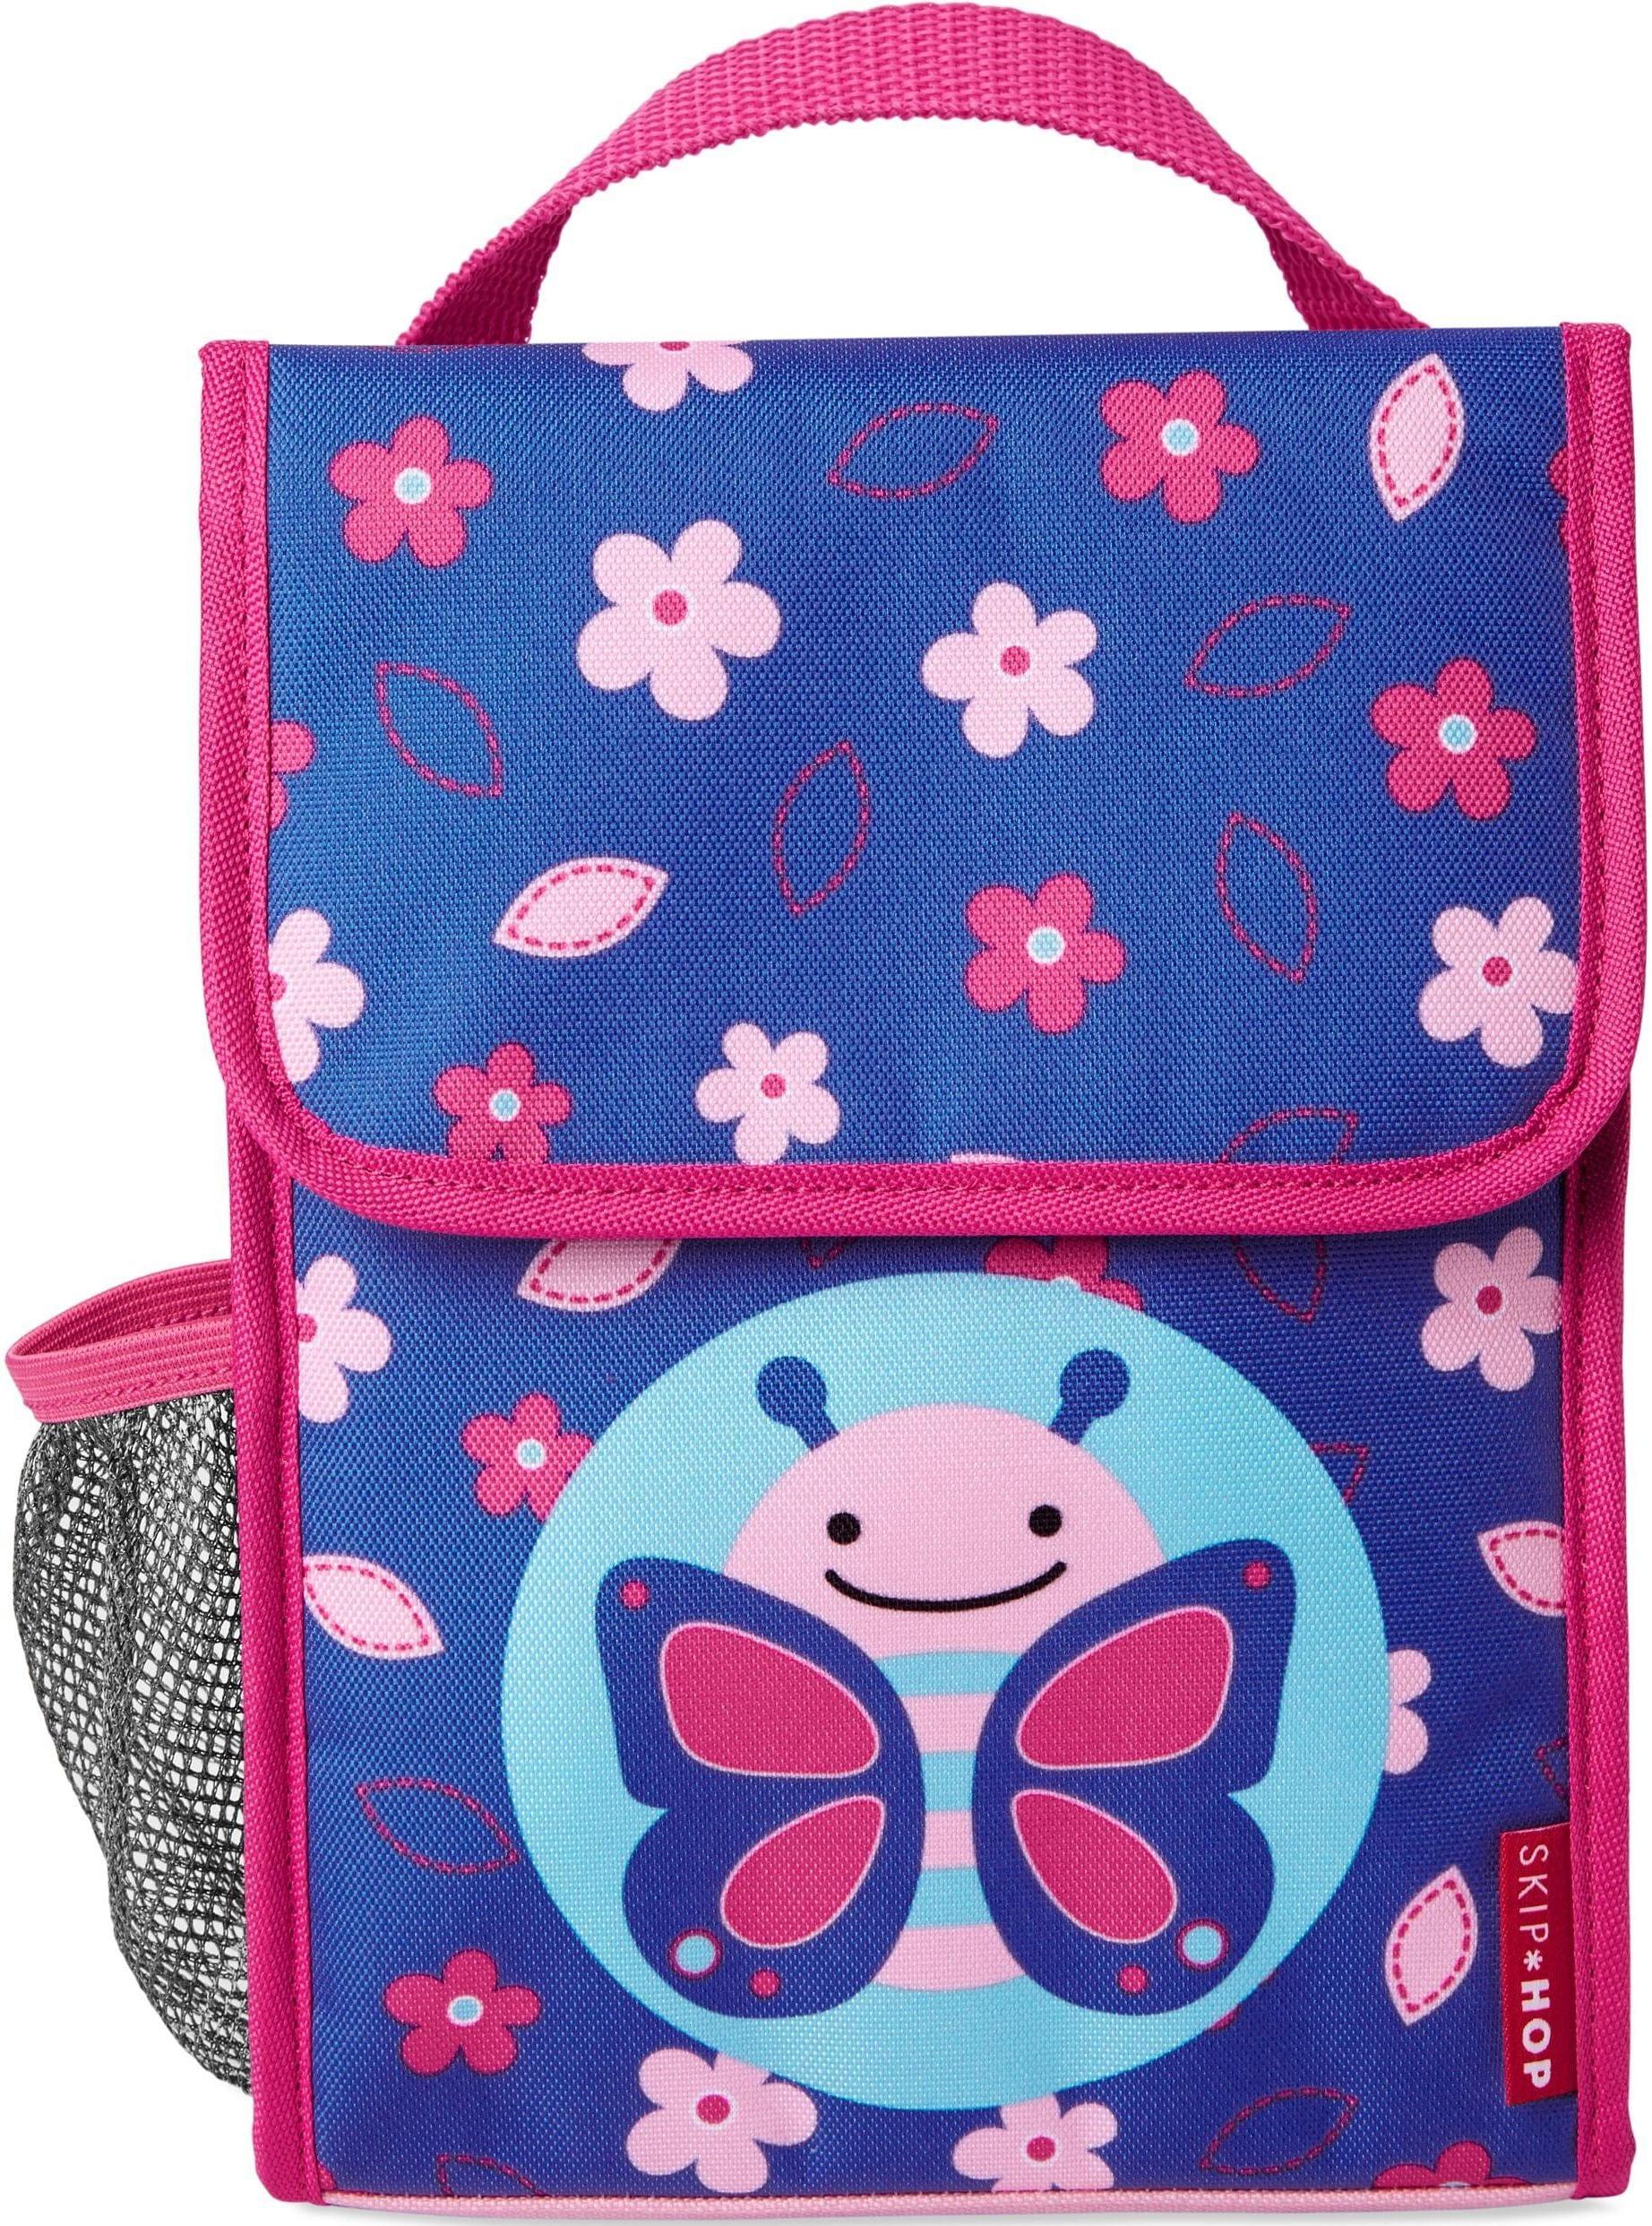 SkipHop  Zoo Lunch Bag - Butterfly